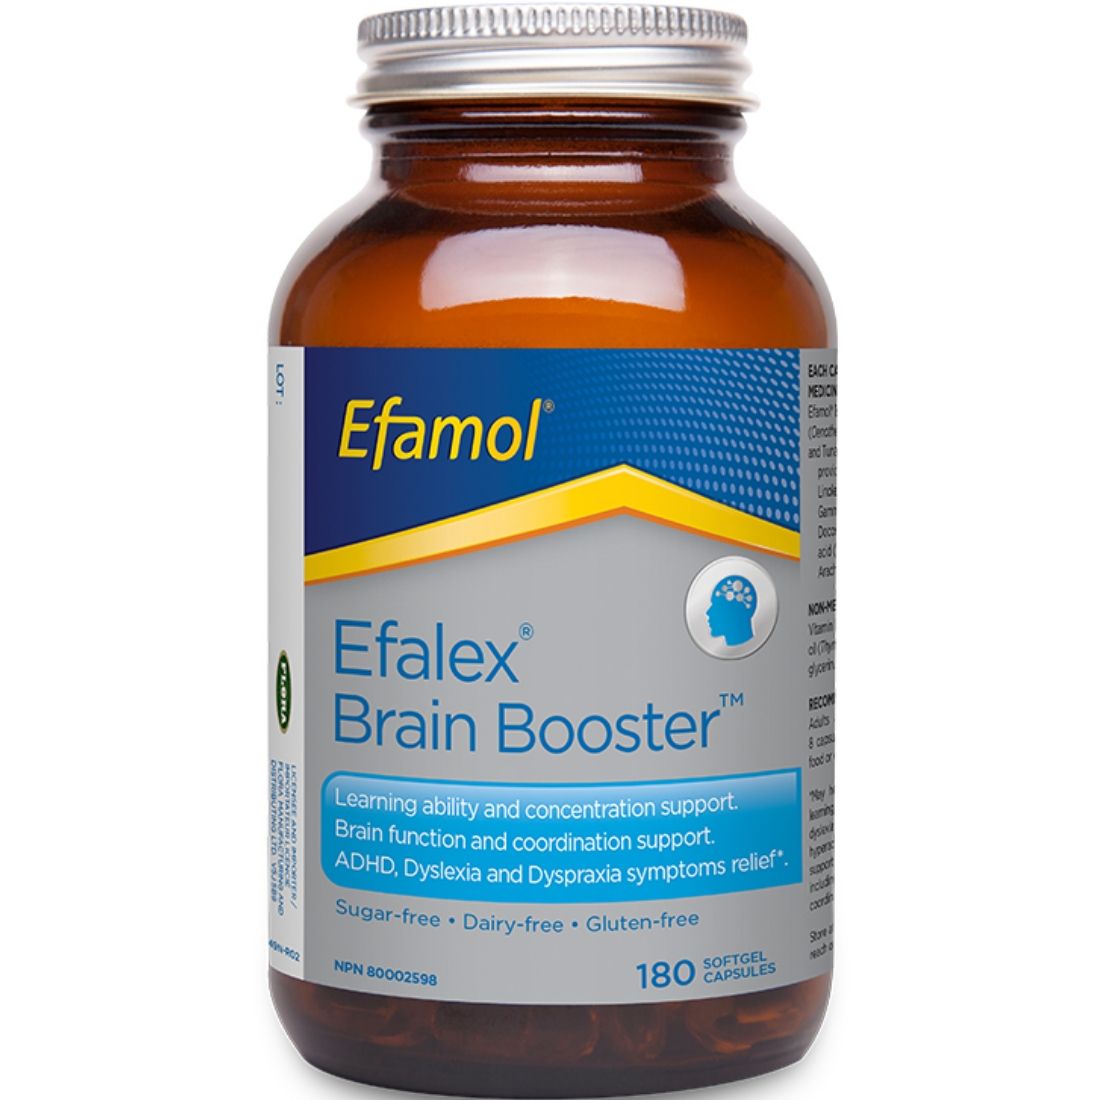 Efamol Efalex Brain Booster, Learning Ability Concentration Support (ADHD, Dyslexia, Dyspraxia Relief), 180 Softgels (50% Off Exp Apr/24 Final Sale)